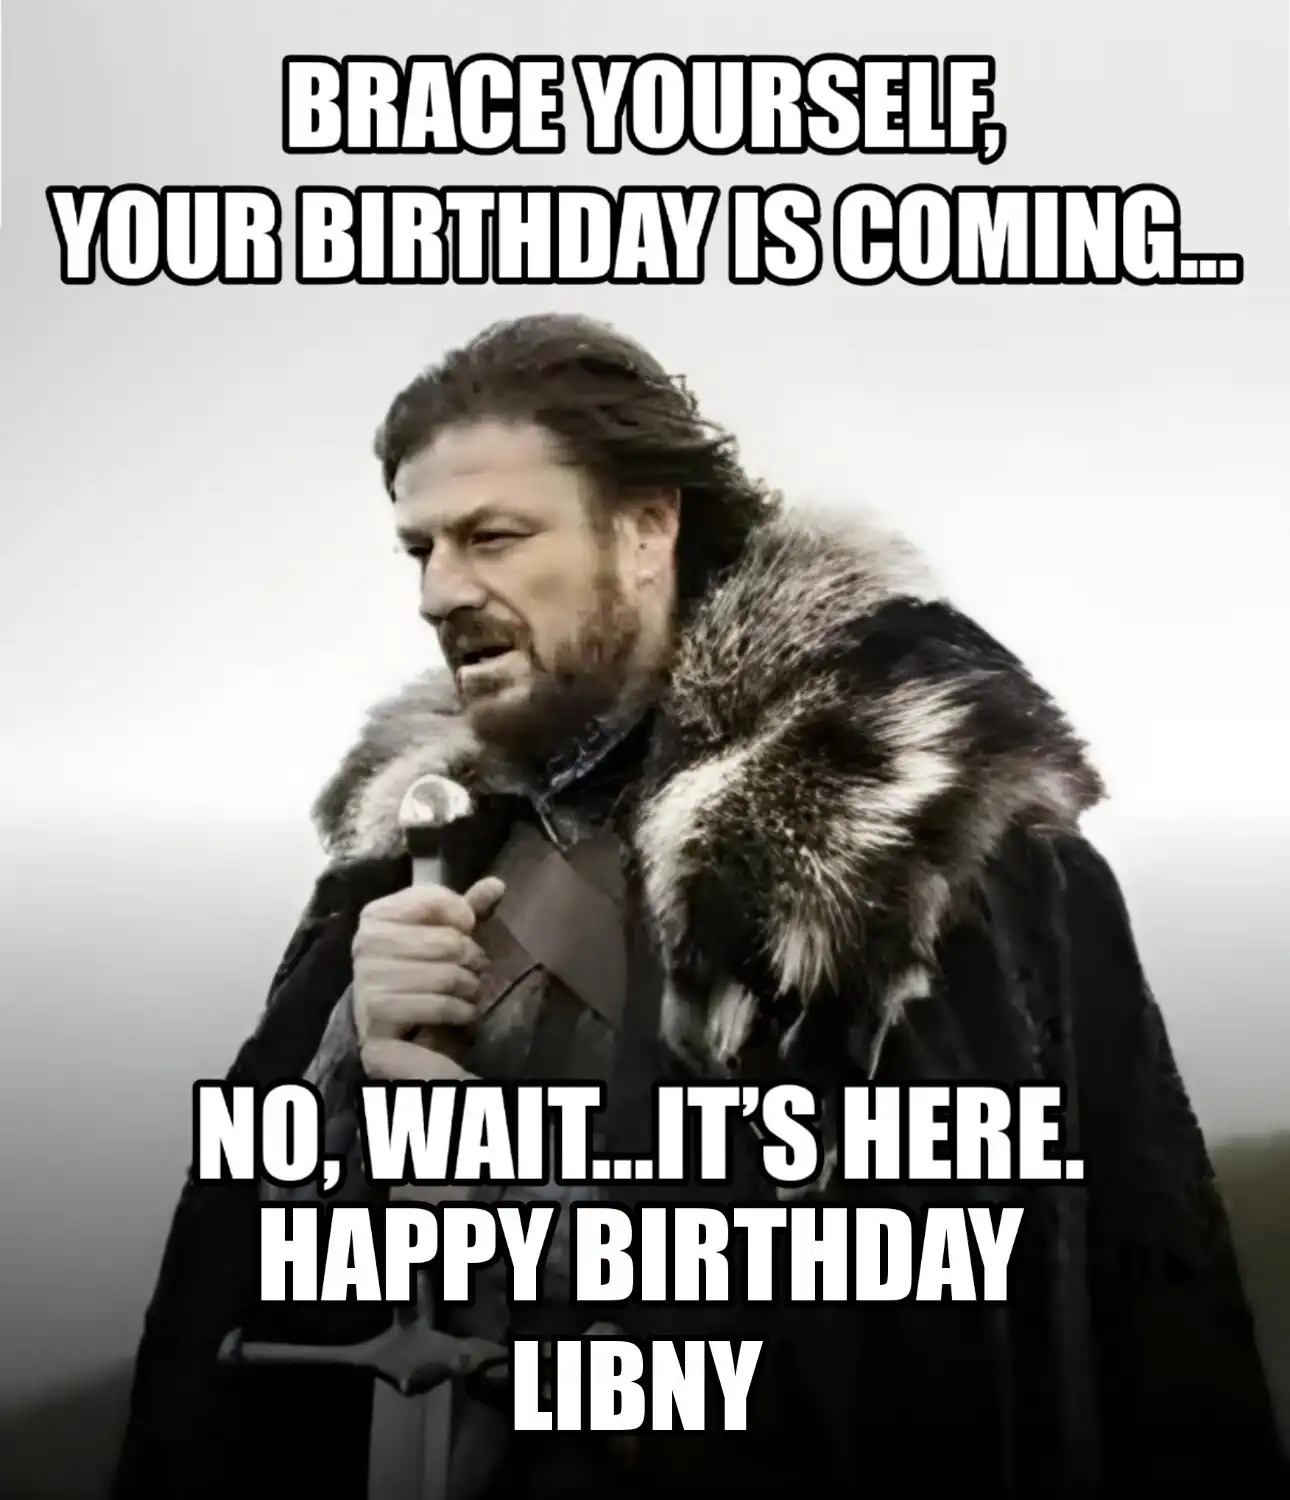 Happy Birthday Libny Brace Yourself Your Birthday Is Coming Meme